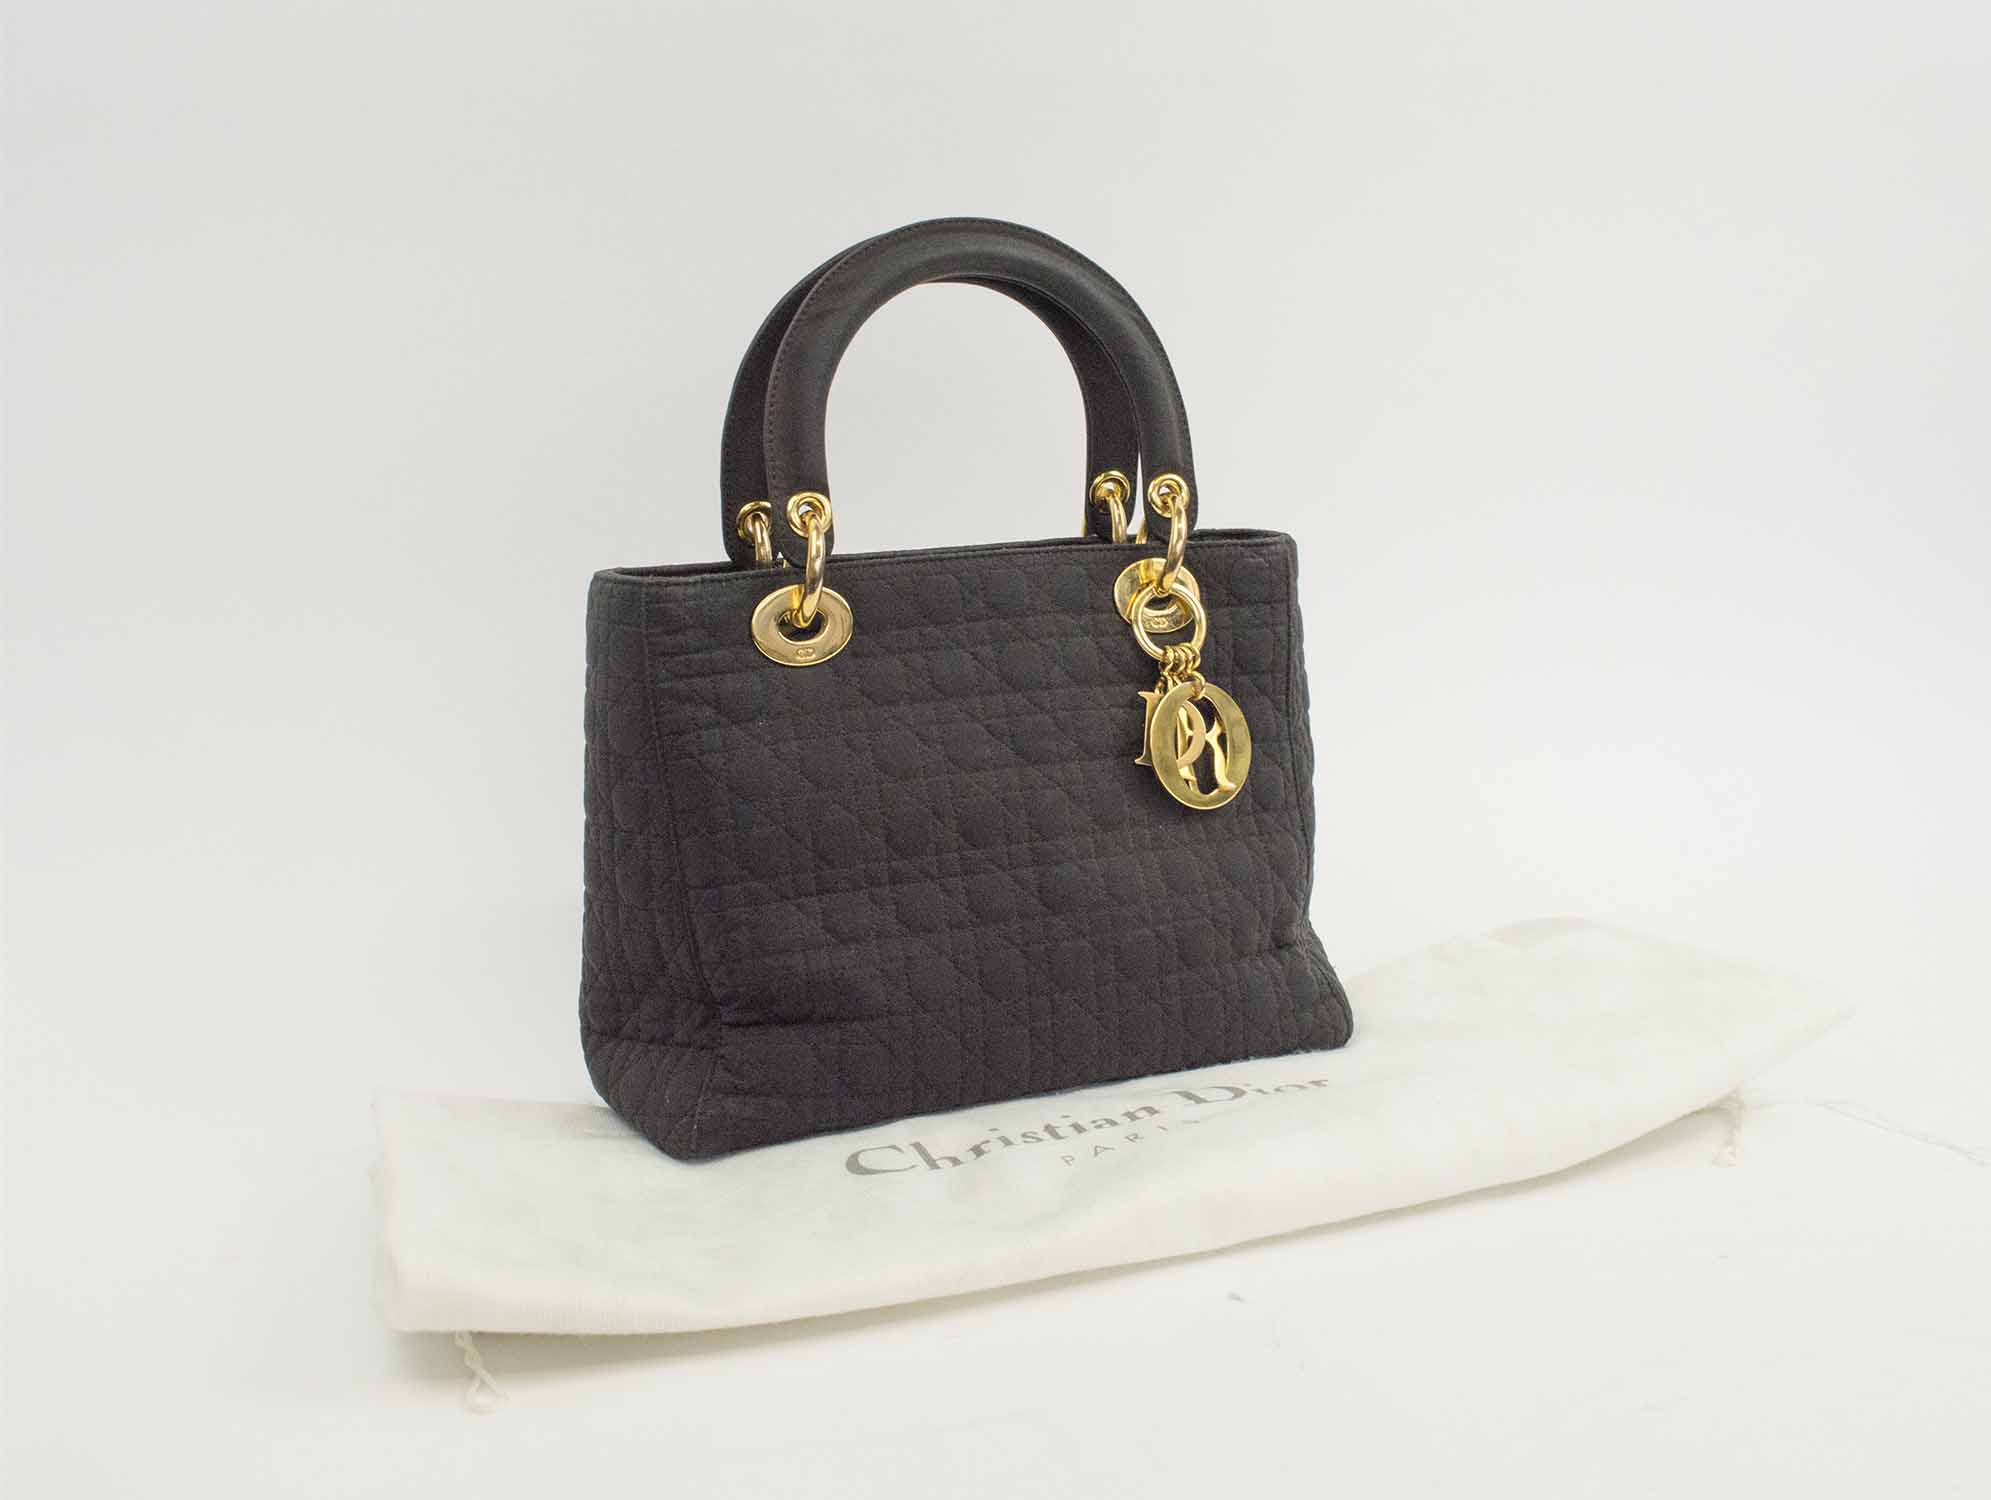 CHRISTIAN DIOR LADY DIOR, in quilt black fabric, gold tone hardware and